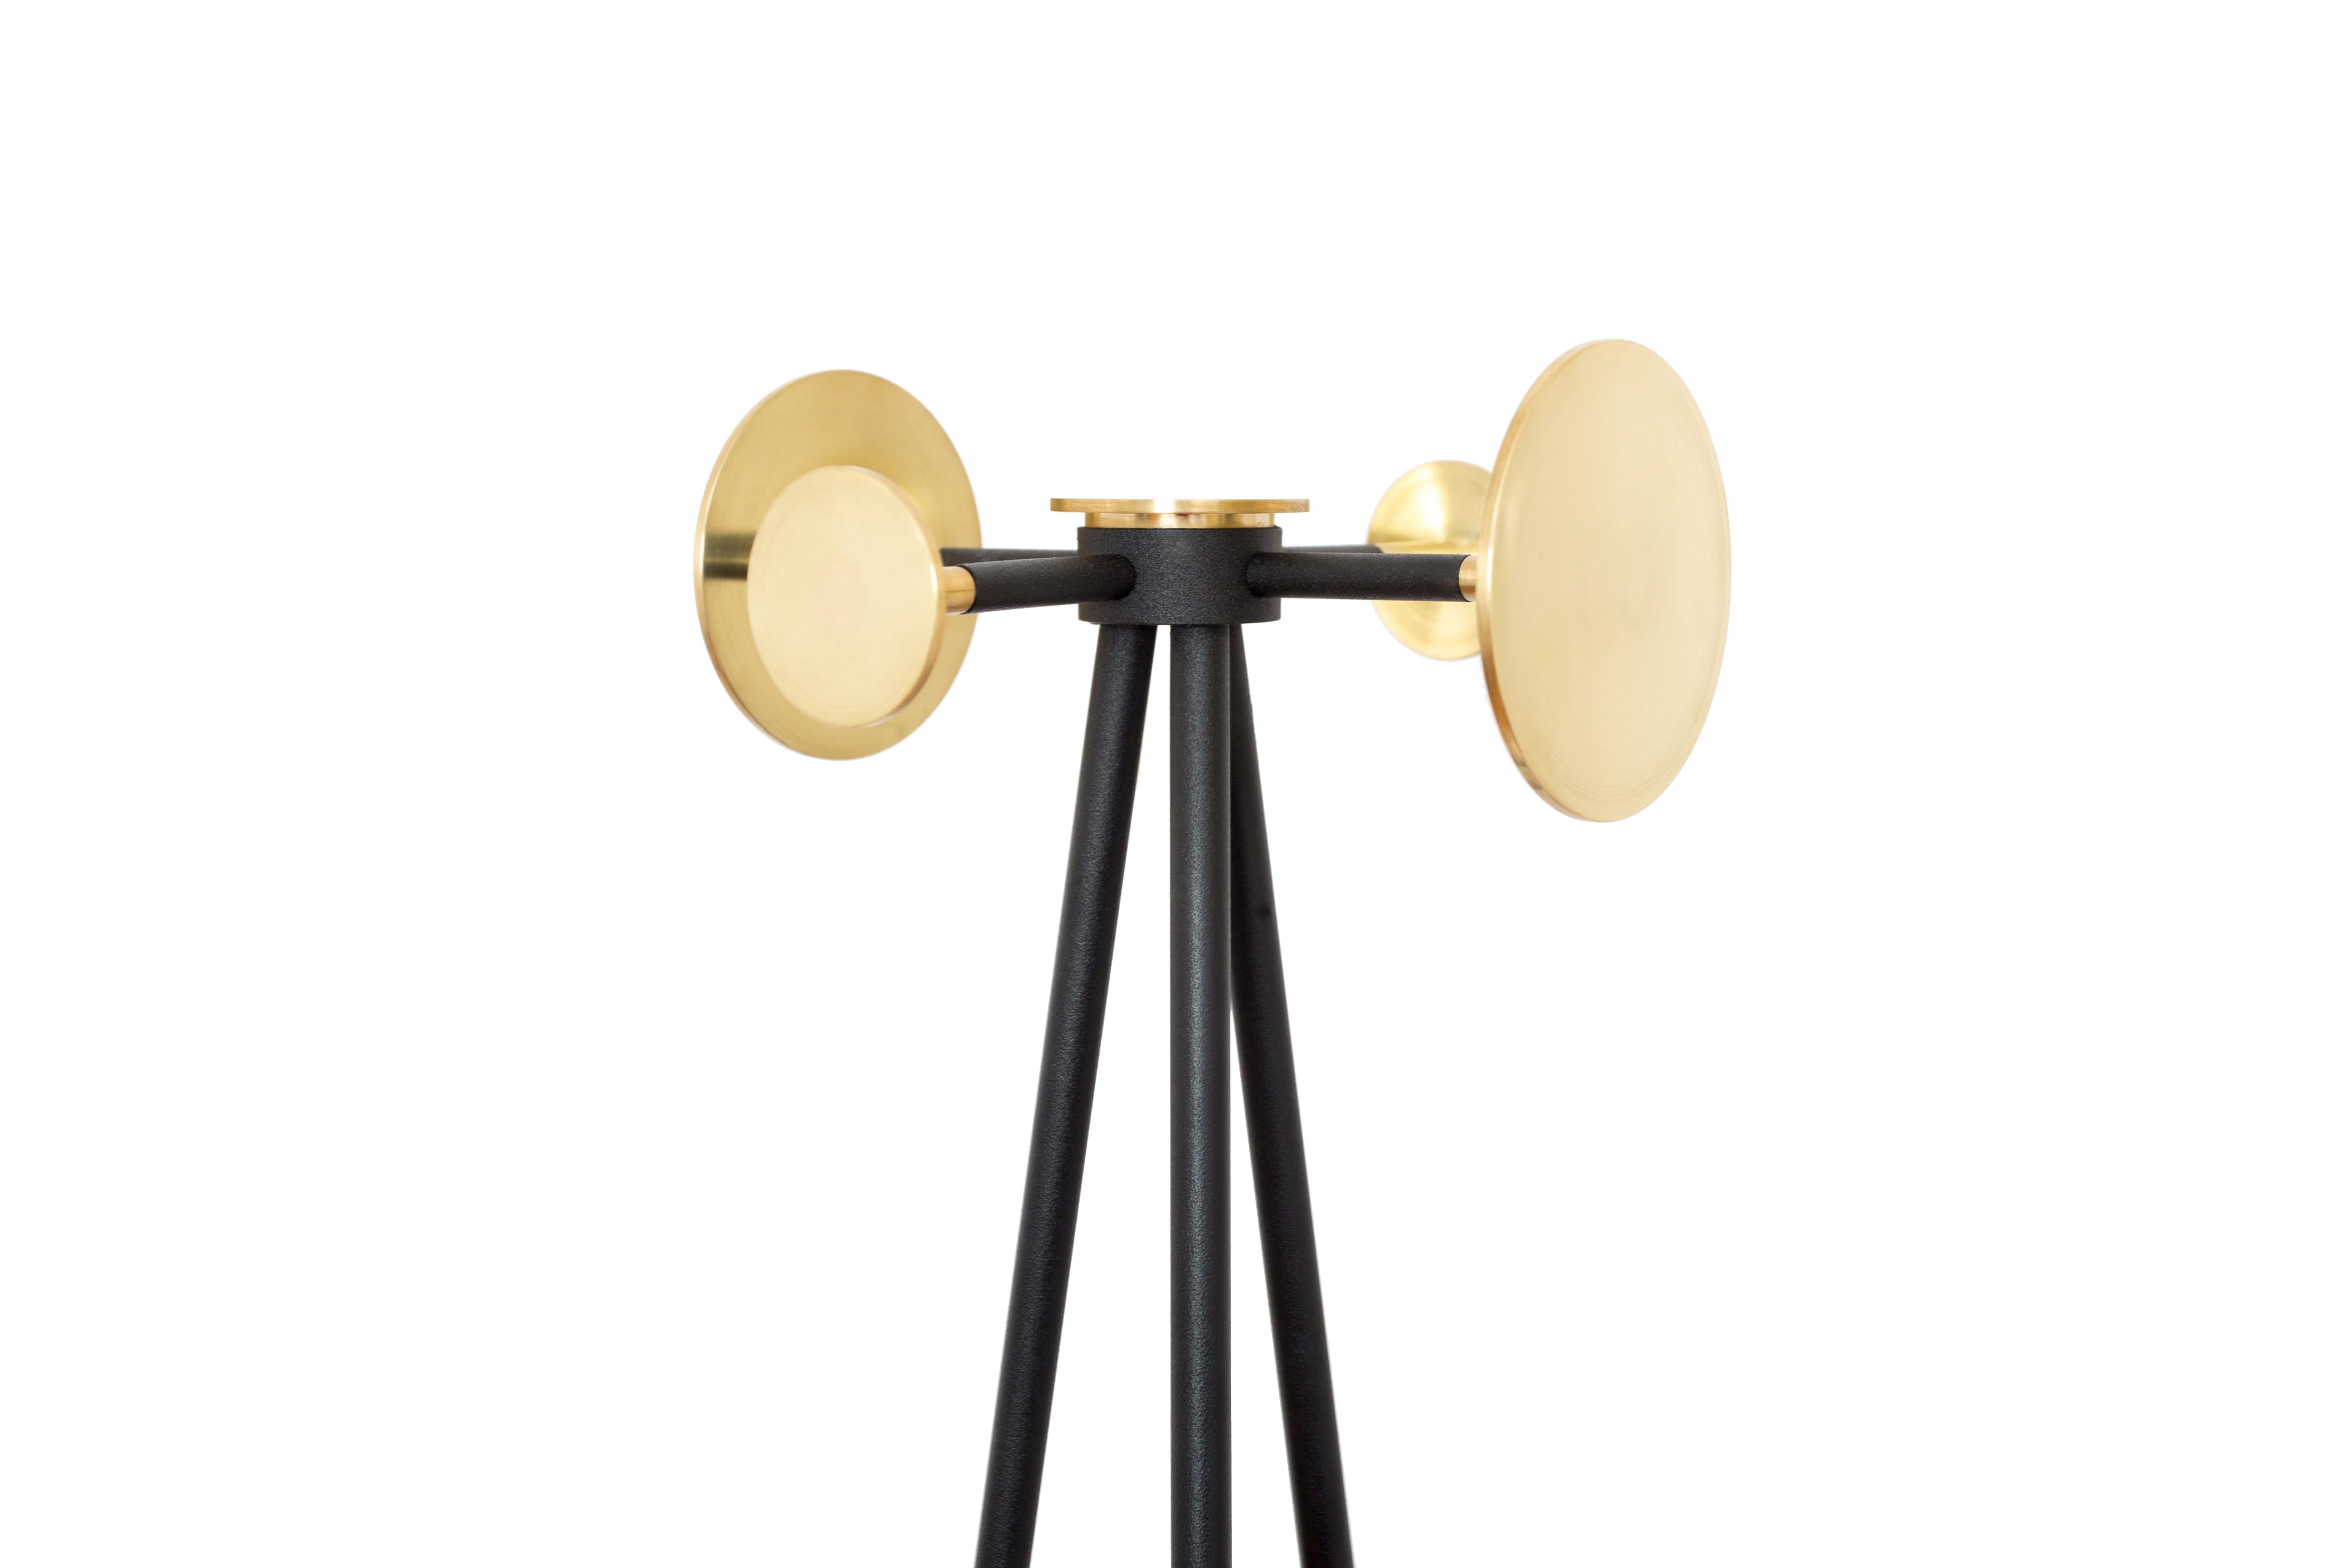 Modern Coat and Umbrella Stand, Brass and Metal, Contemporary Mexican Design